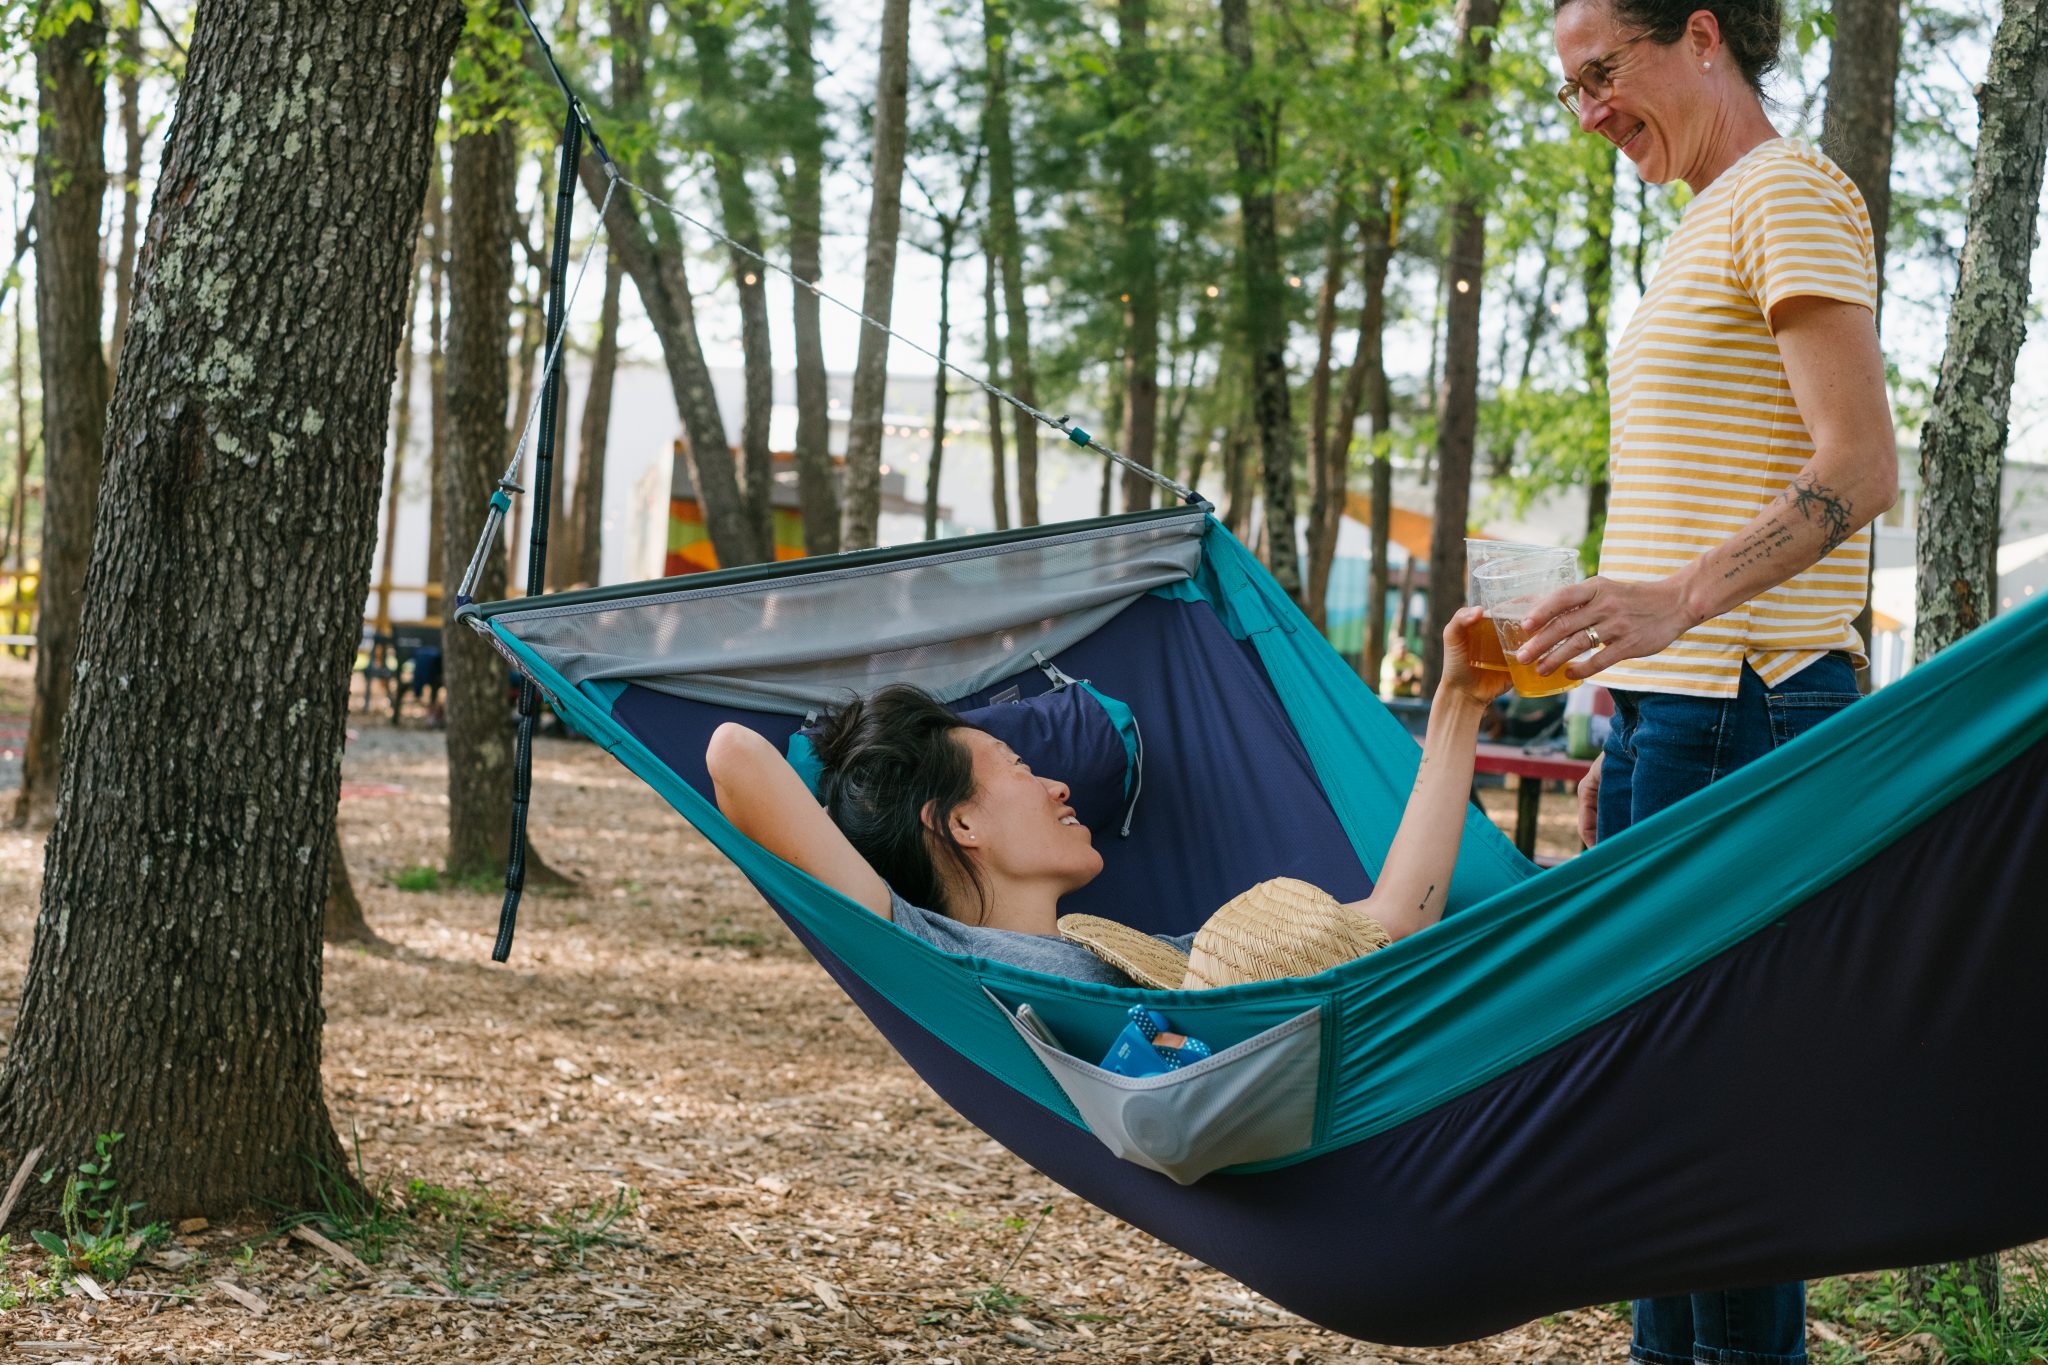 Erin McGrady is laying in a blue hammock toasting Caroline Whatley with a beer. Highland Brewing Company's shipping containers are in the background.